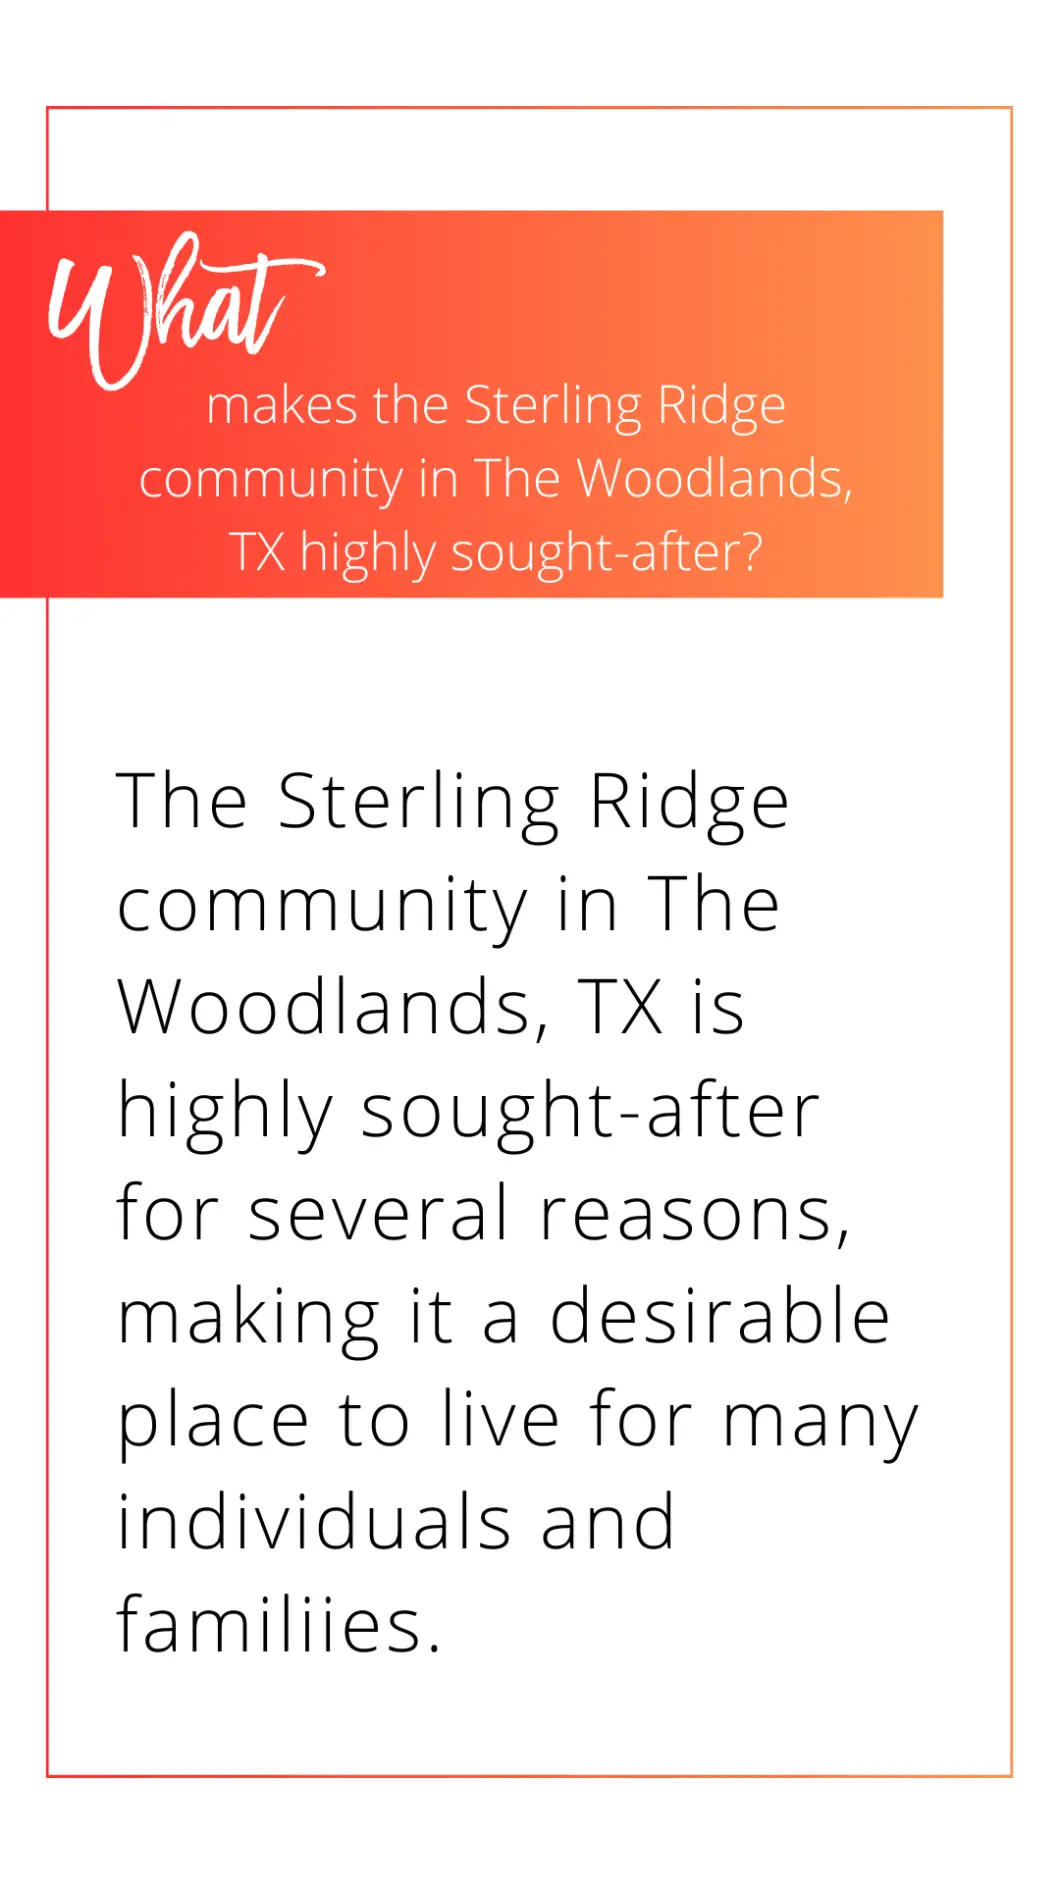 What makes the Sterling Ridge community in The Woodlands TX highly sought after